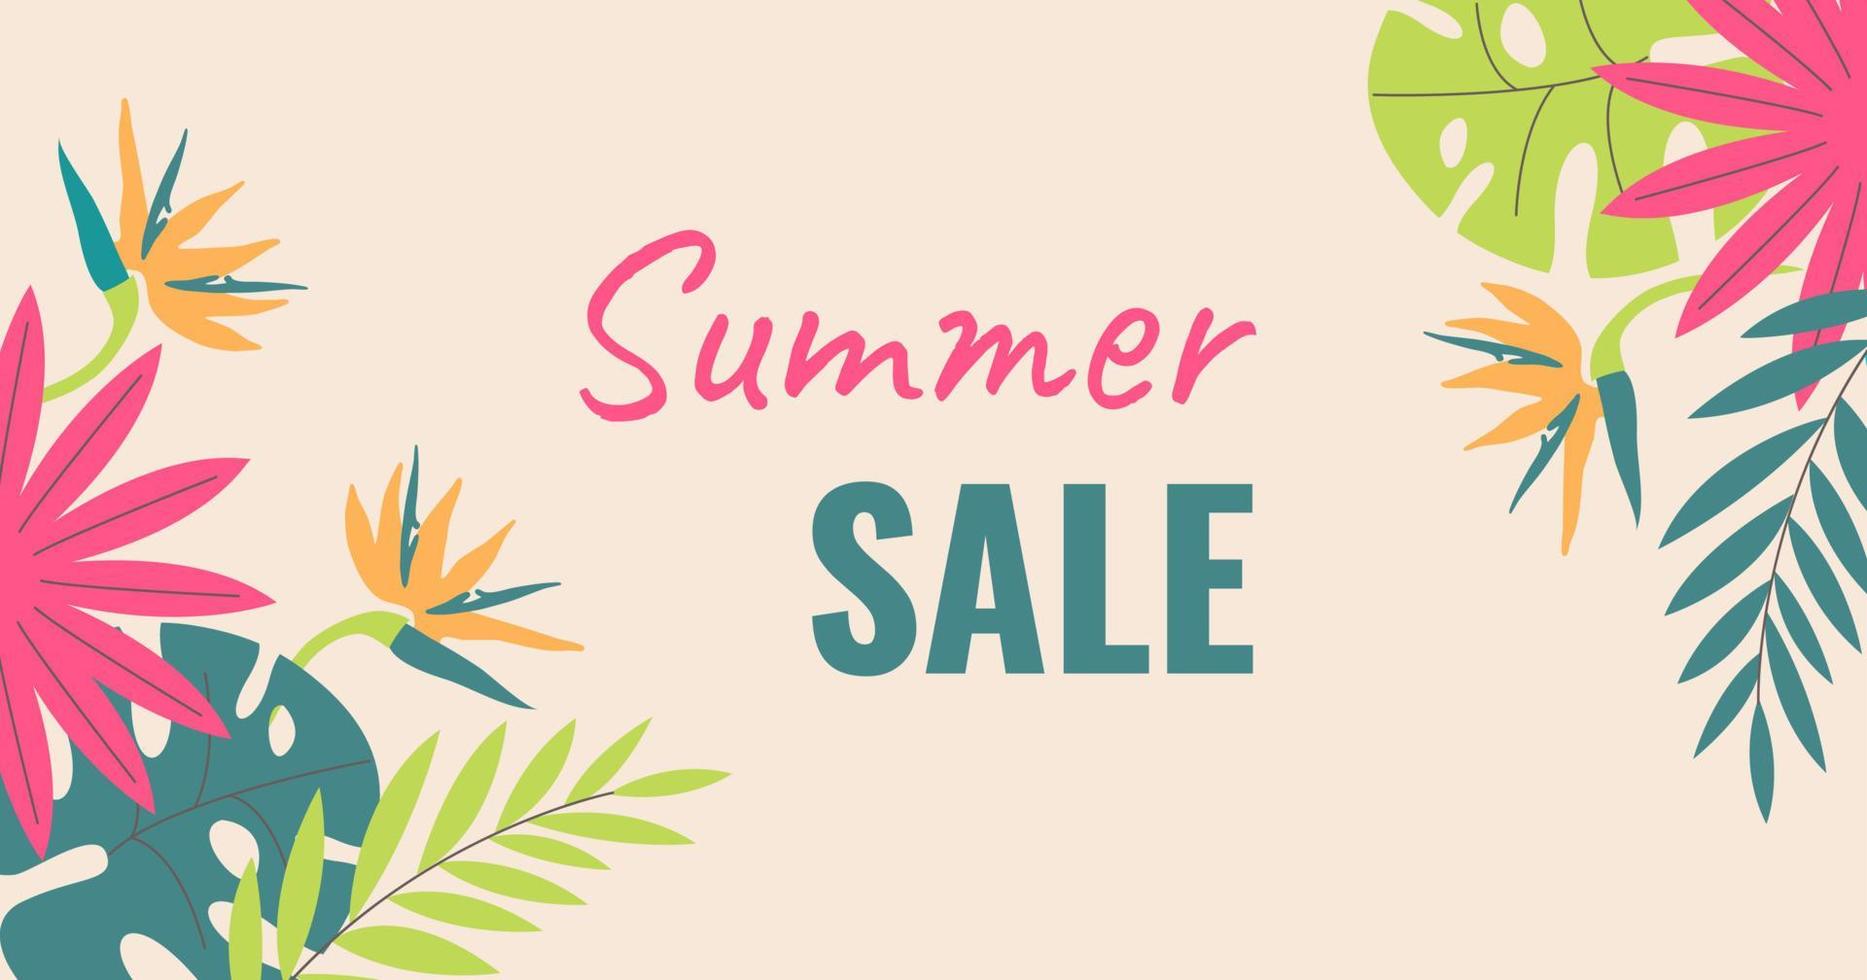 Creative, bright, colorful background with tropical leaves. Summer sale, poster template, greeting card, banner Vector illustration.